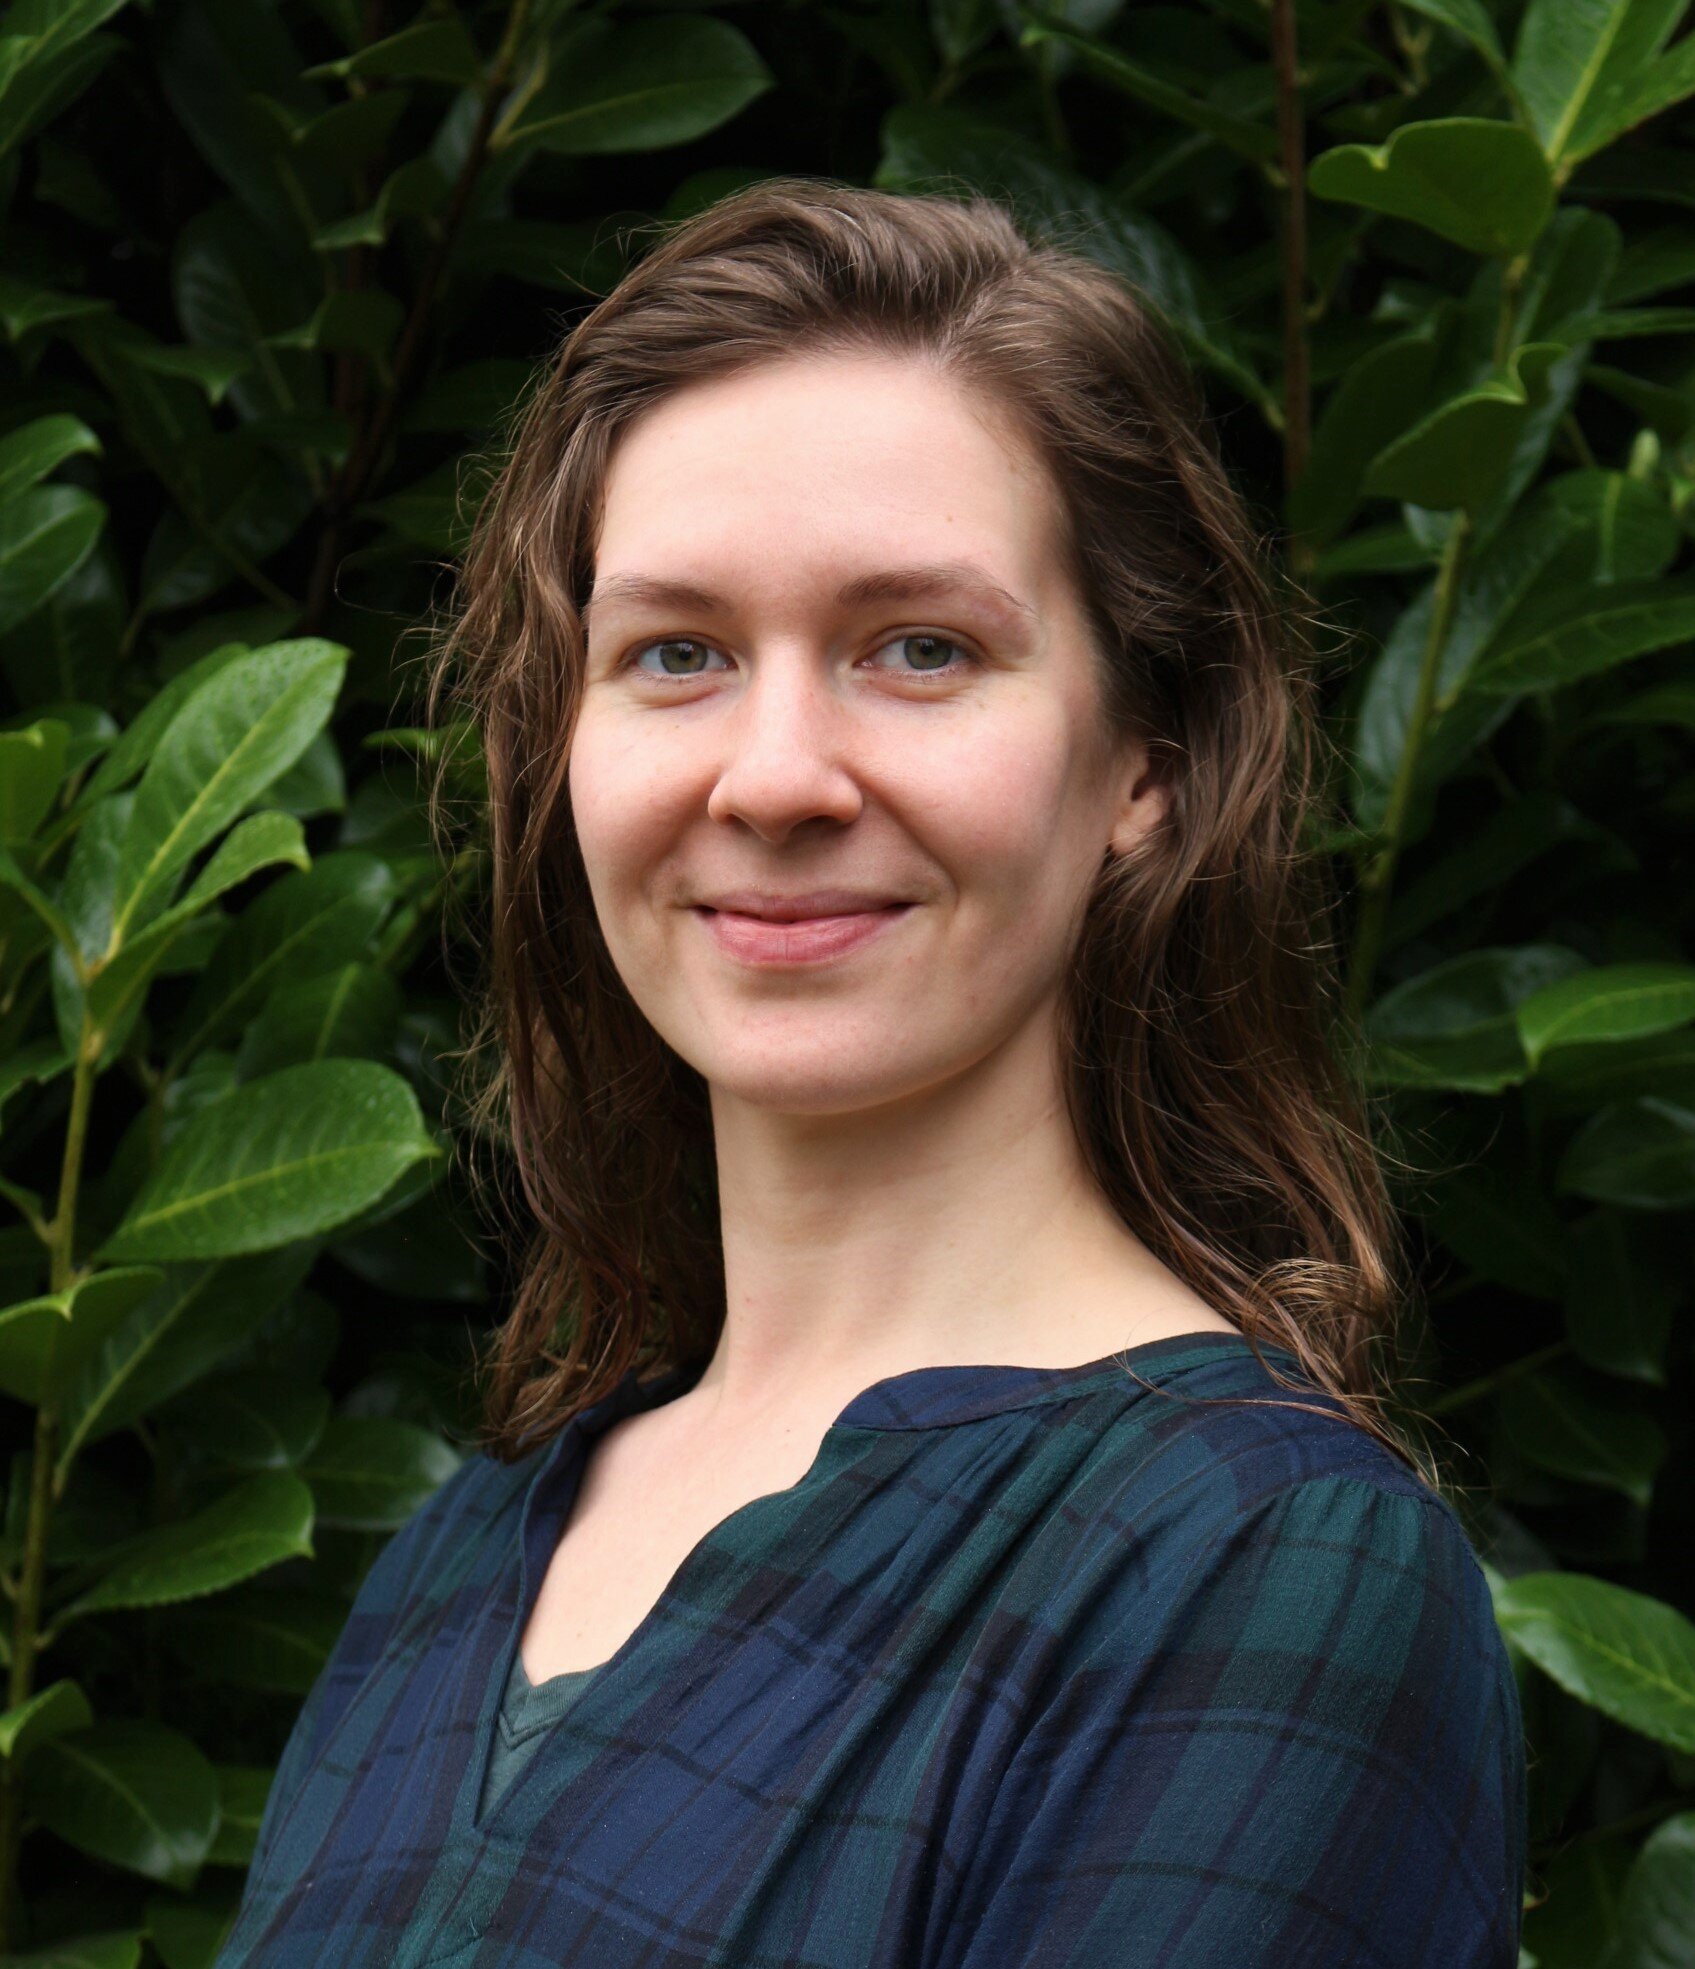  Julia is a research technician working with Aaron Galloway at the University of Oregon. 